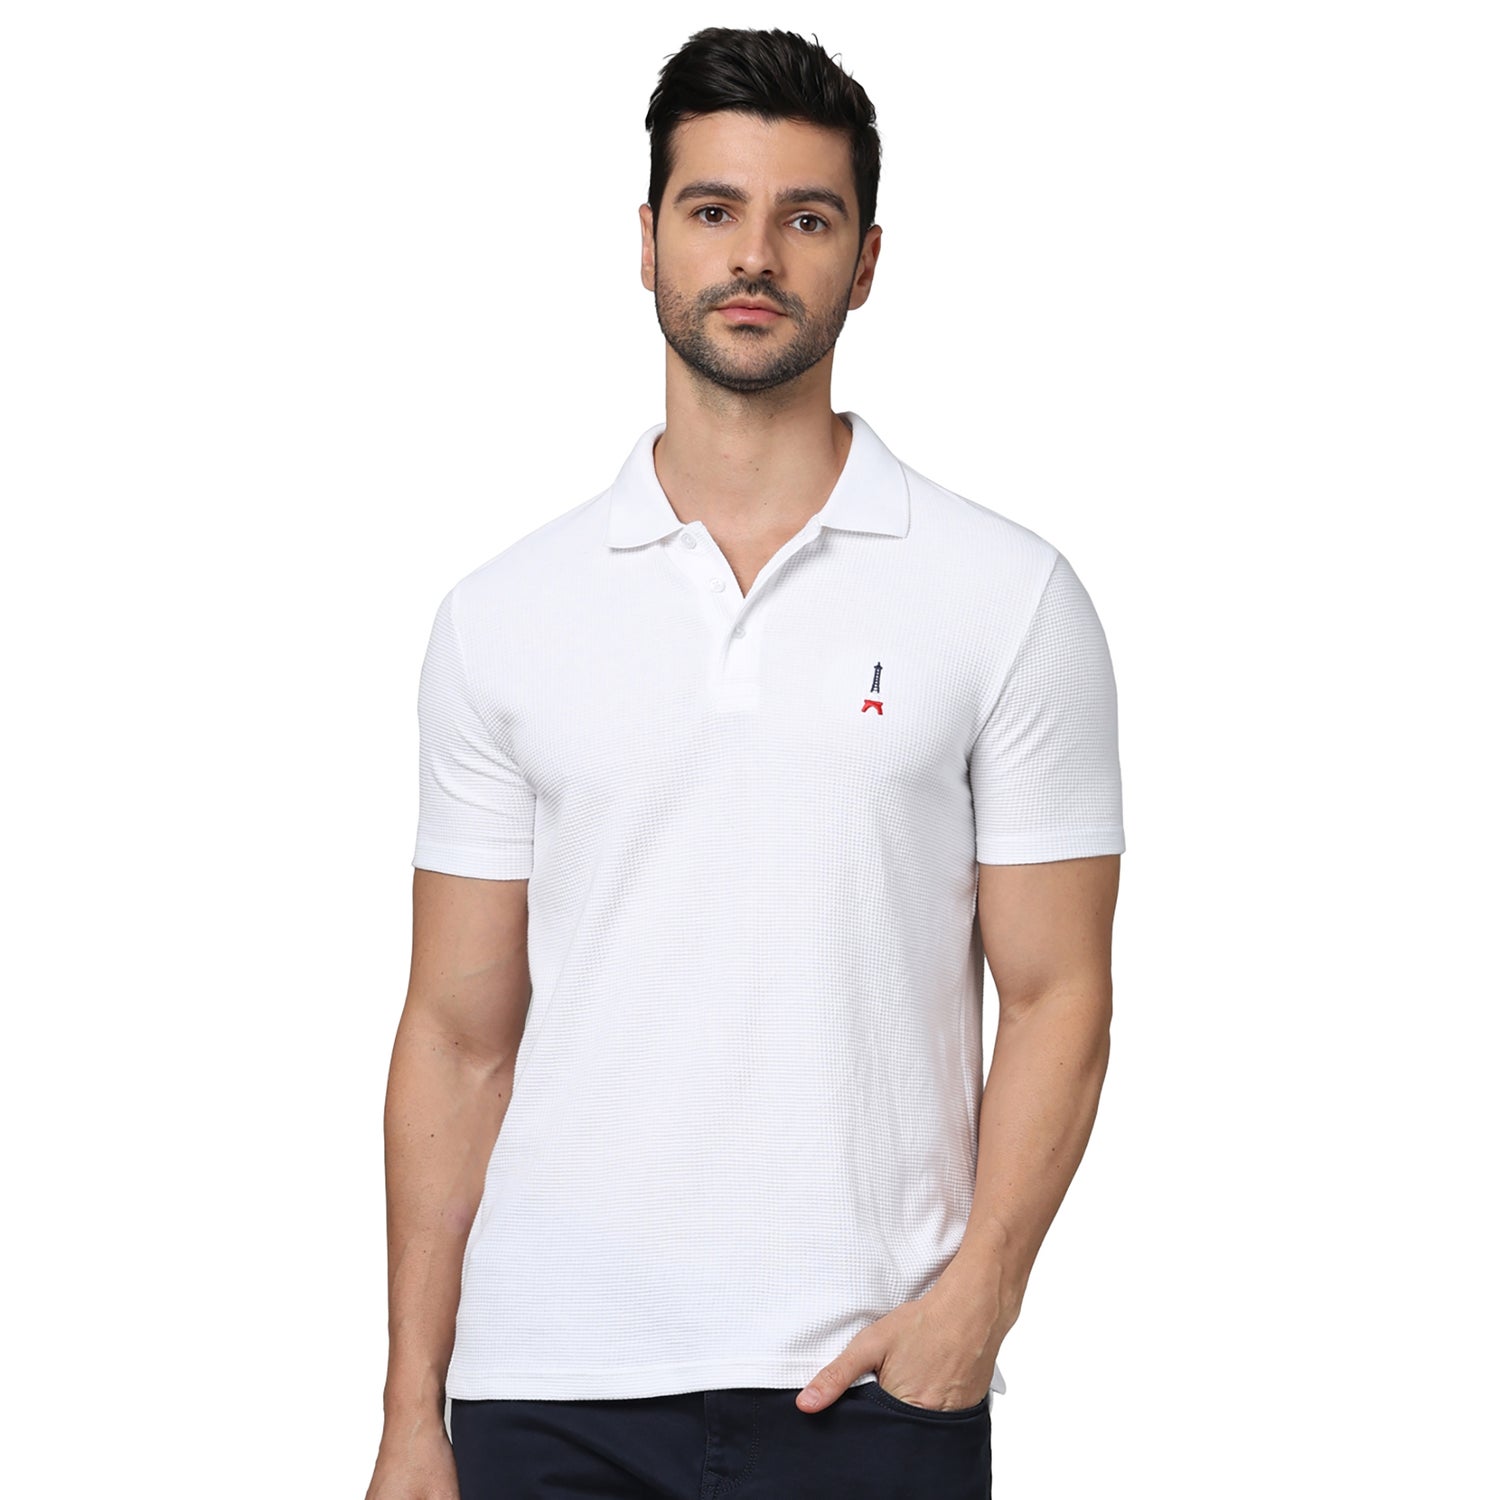 Men's White Polo Collar Solid Regular Fit Cotton Basic Polo Tshirts (GEWAFFLE)